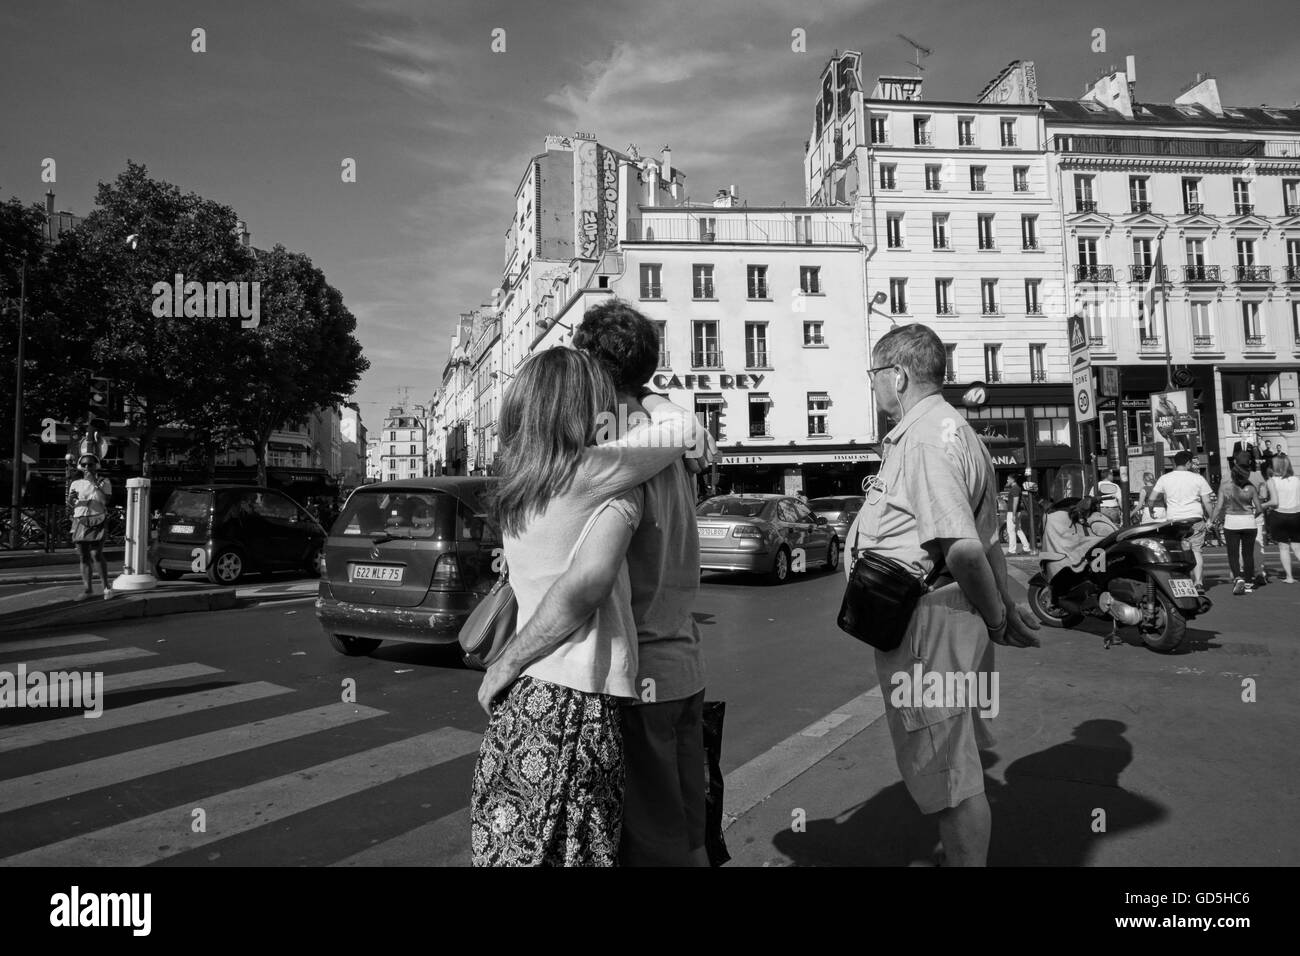 Couple embracing on streets of paris, france, europe Stock Photo